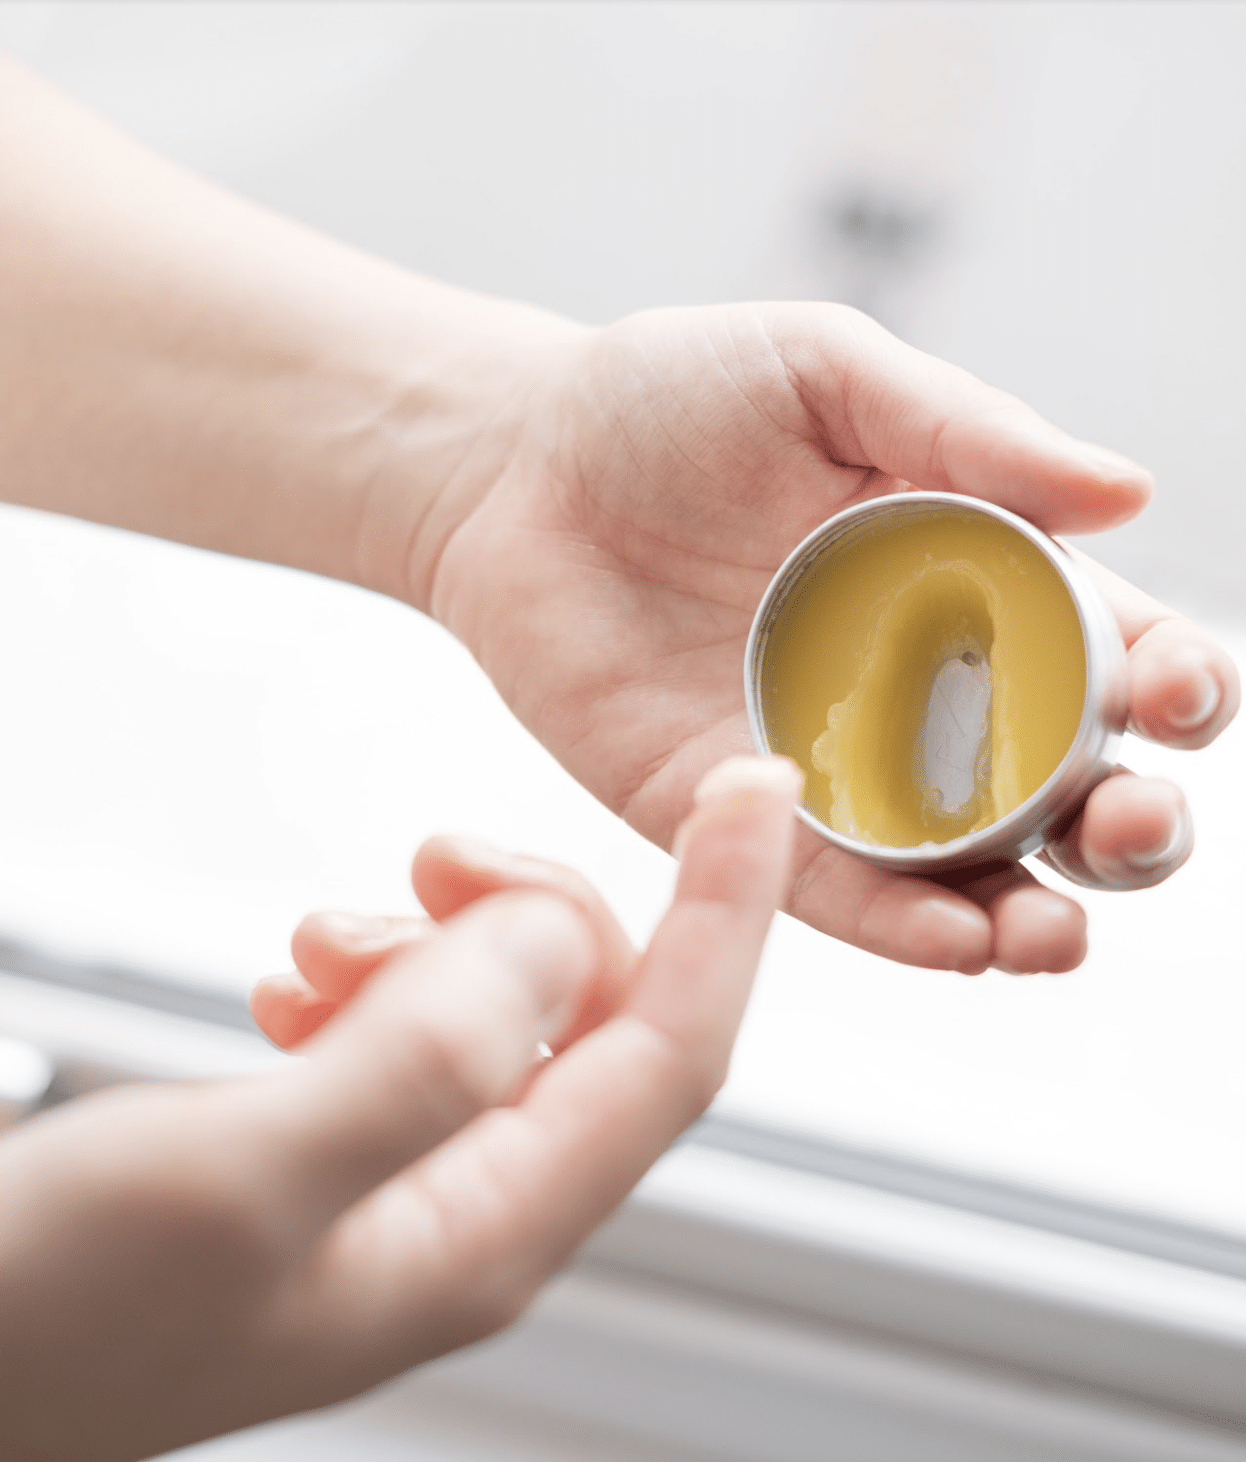 Image is a pair of hands reaching into a jar of moisturizer. The jar is silver and the balm is a yellow, natural color.